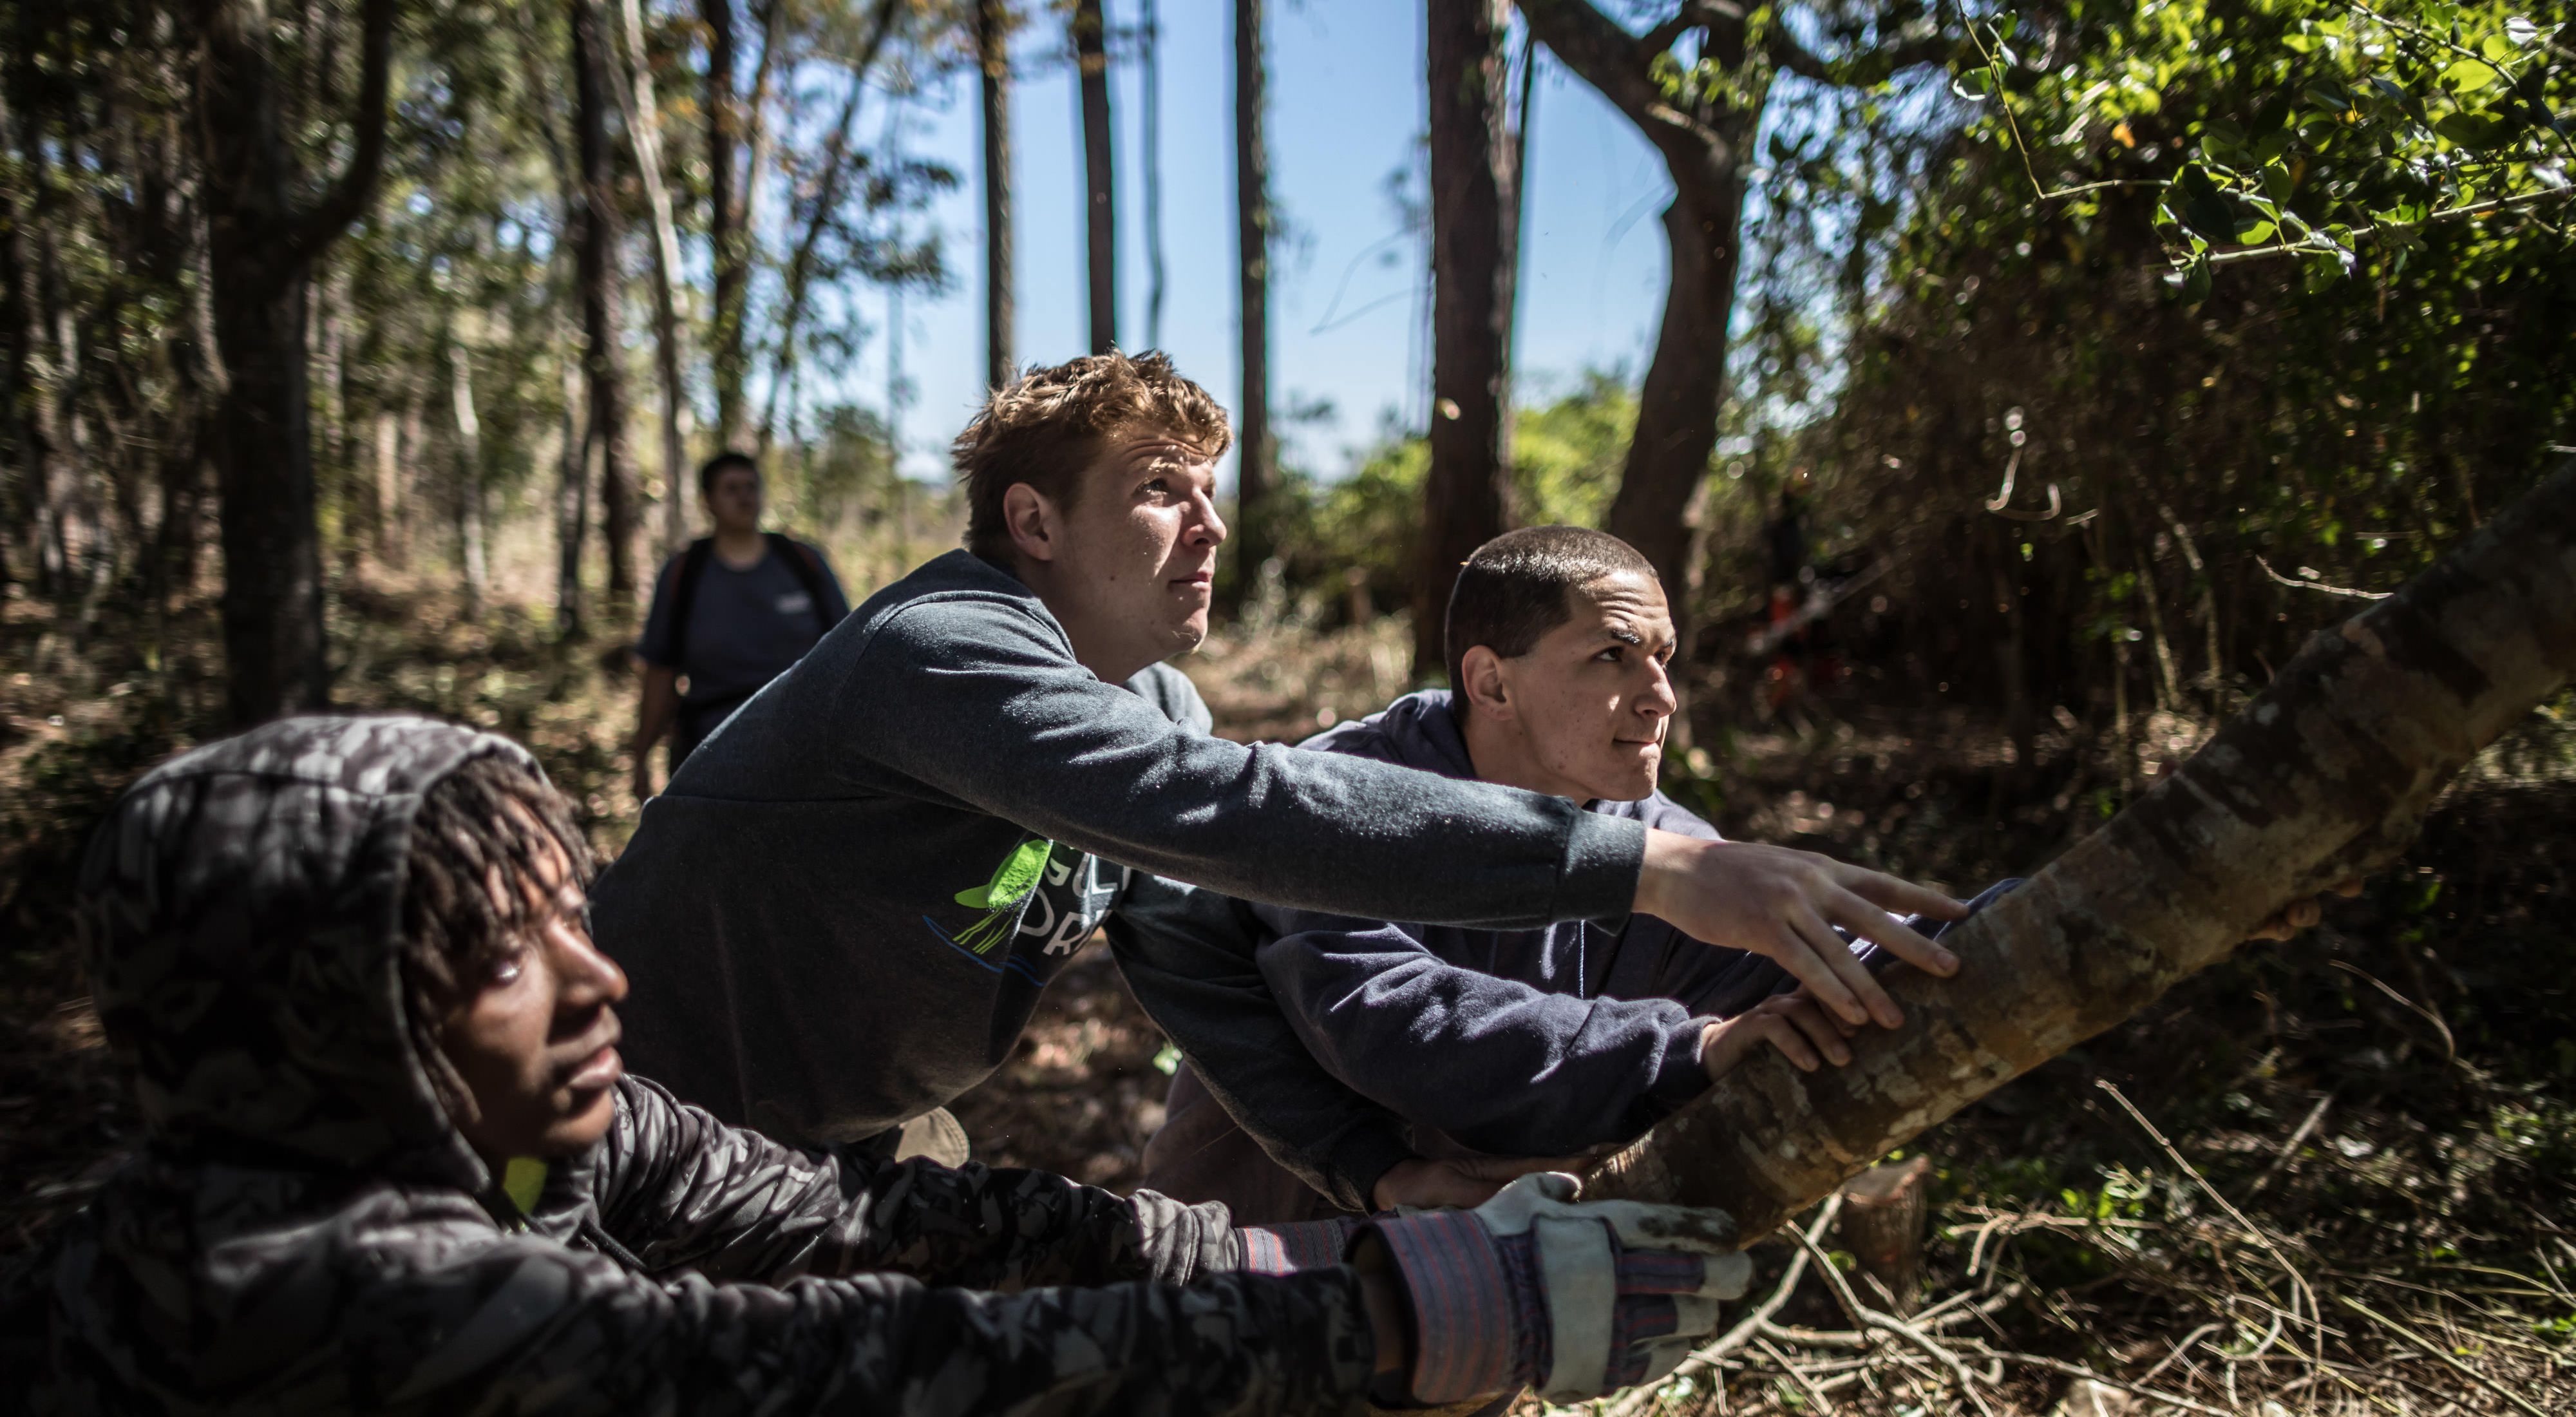 Conservation Corps members Quantavius Fuller, 20, Destin Dodd, 20, and Jonathan James, 18, push down a cut tree in Apalachicola, Florida, while working on environmental sustainability needs for the Panhandle region of the state. This project is also supported by The Nature Conservancy.  